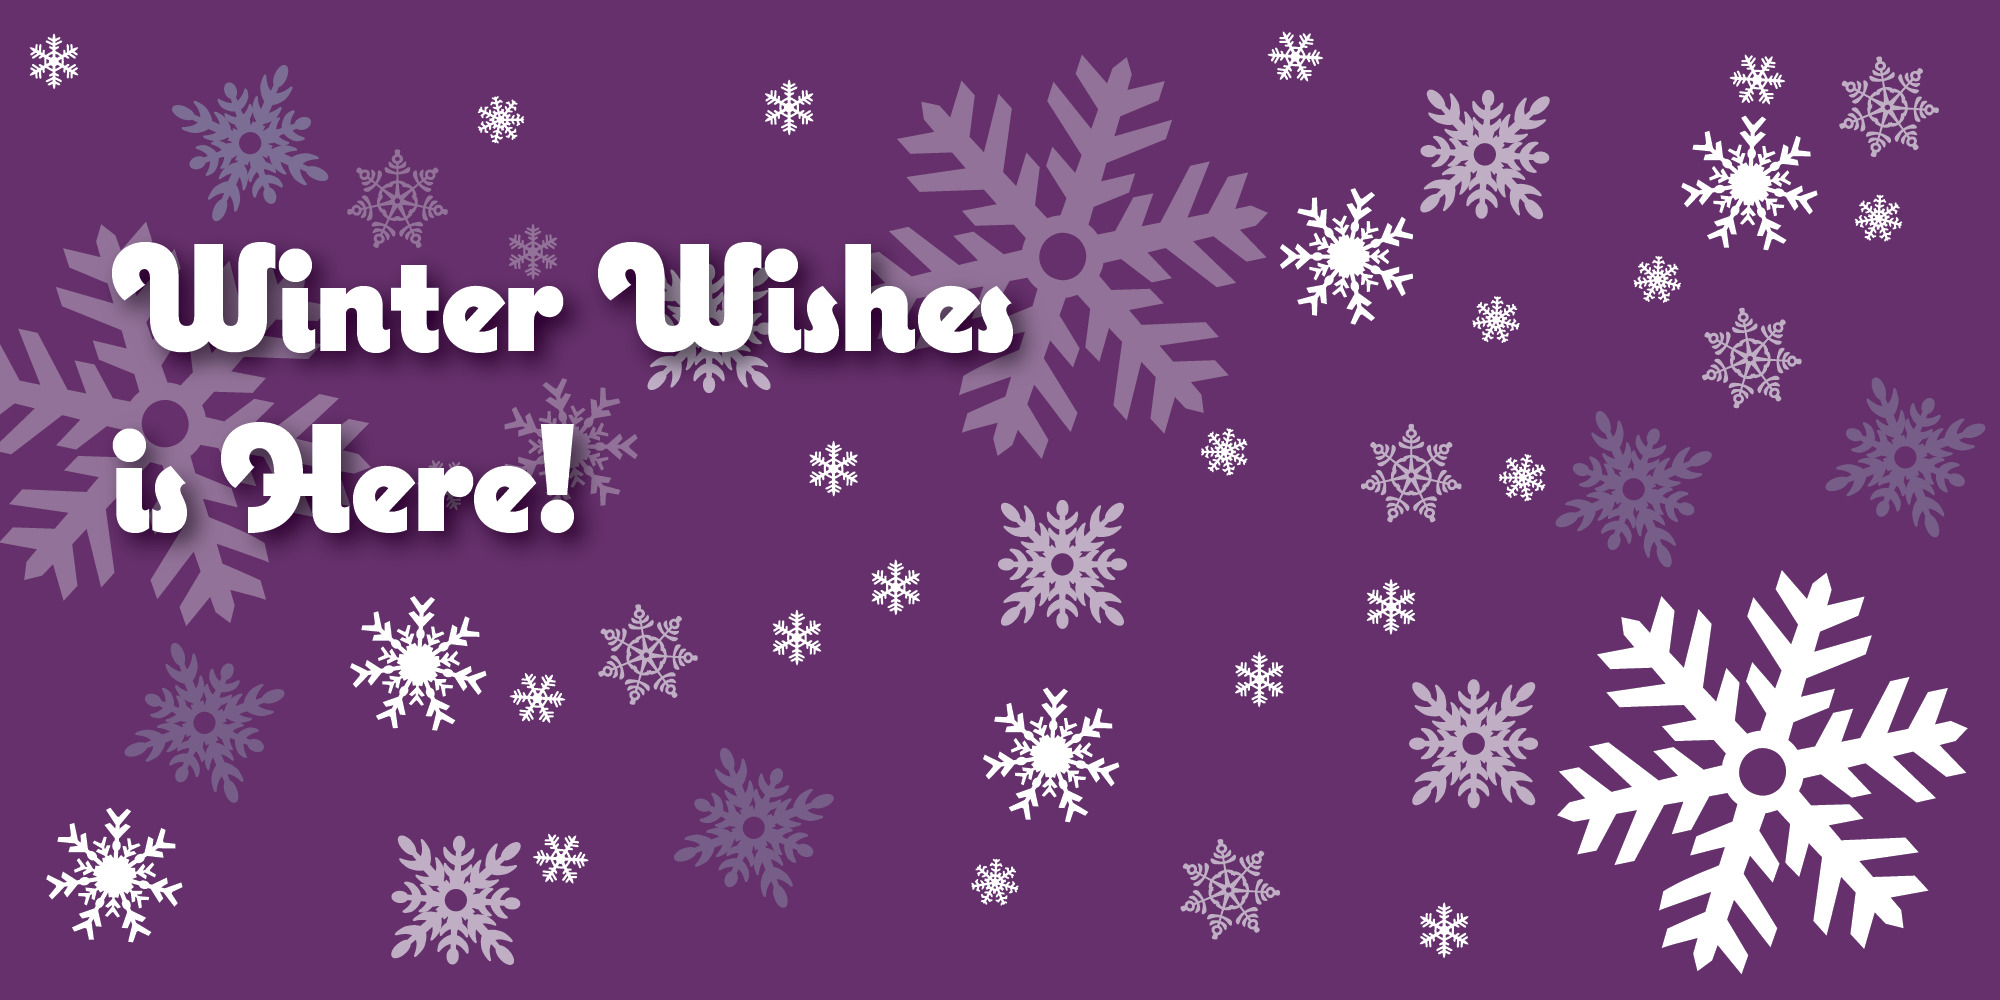 Fulfill a family's winter wishes today!